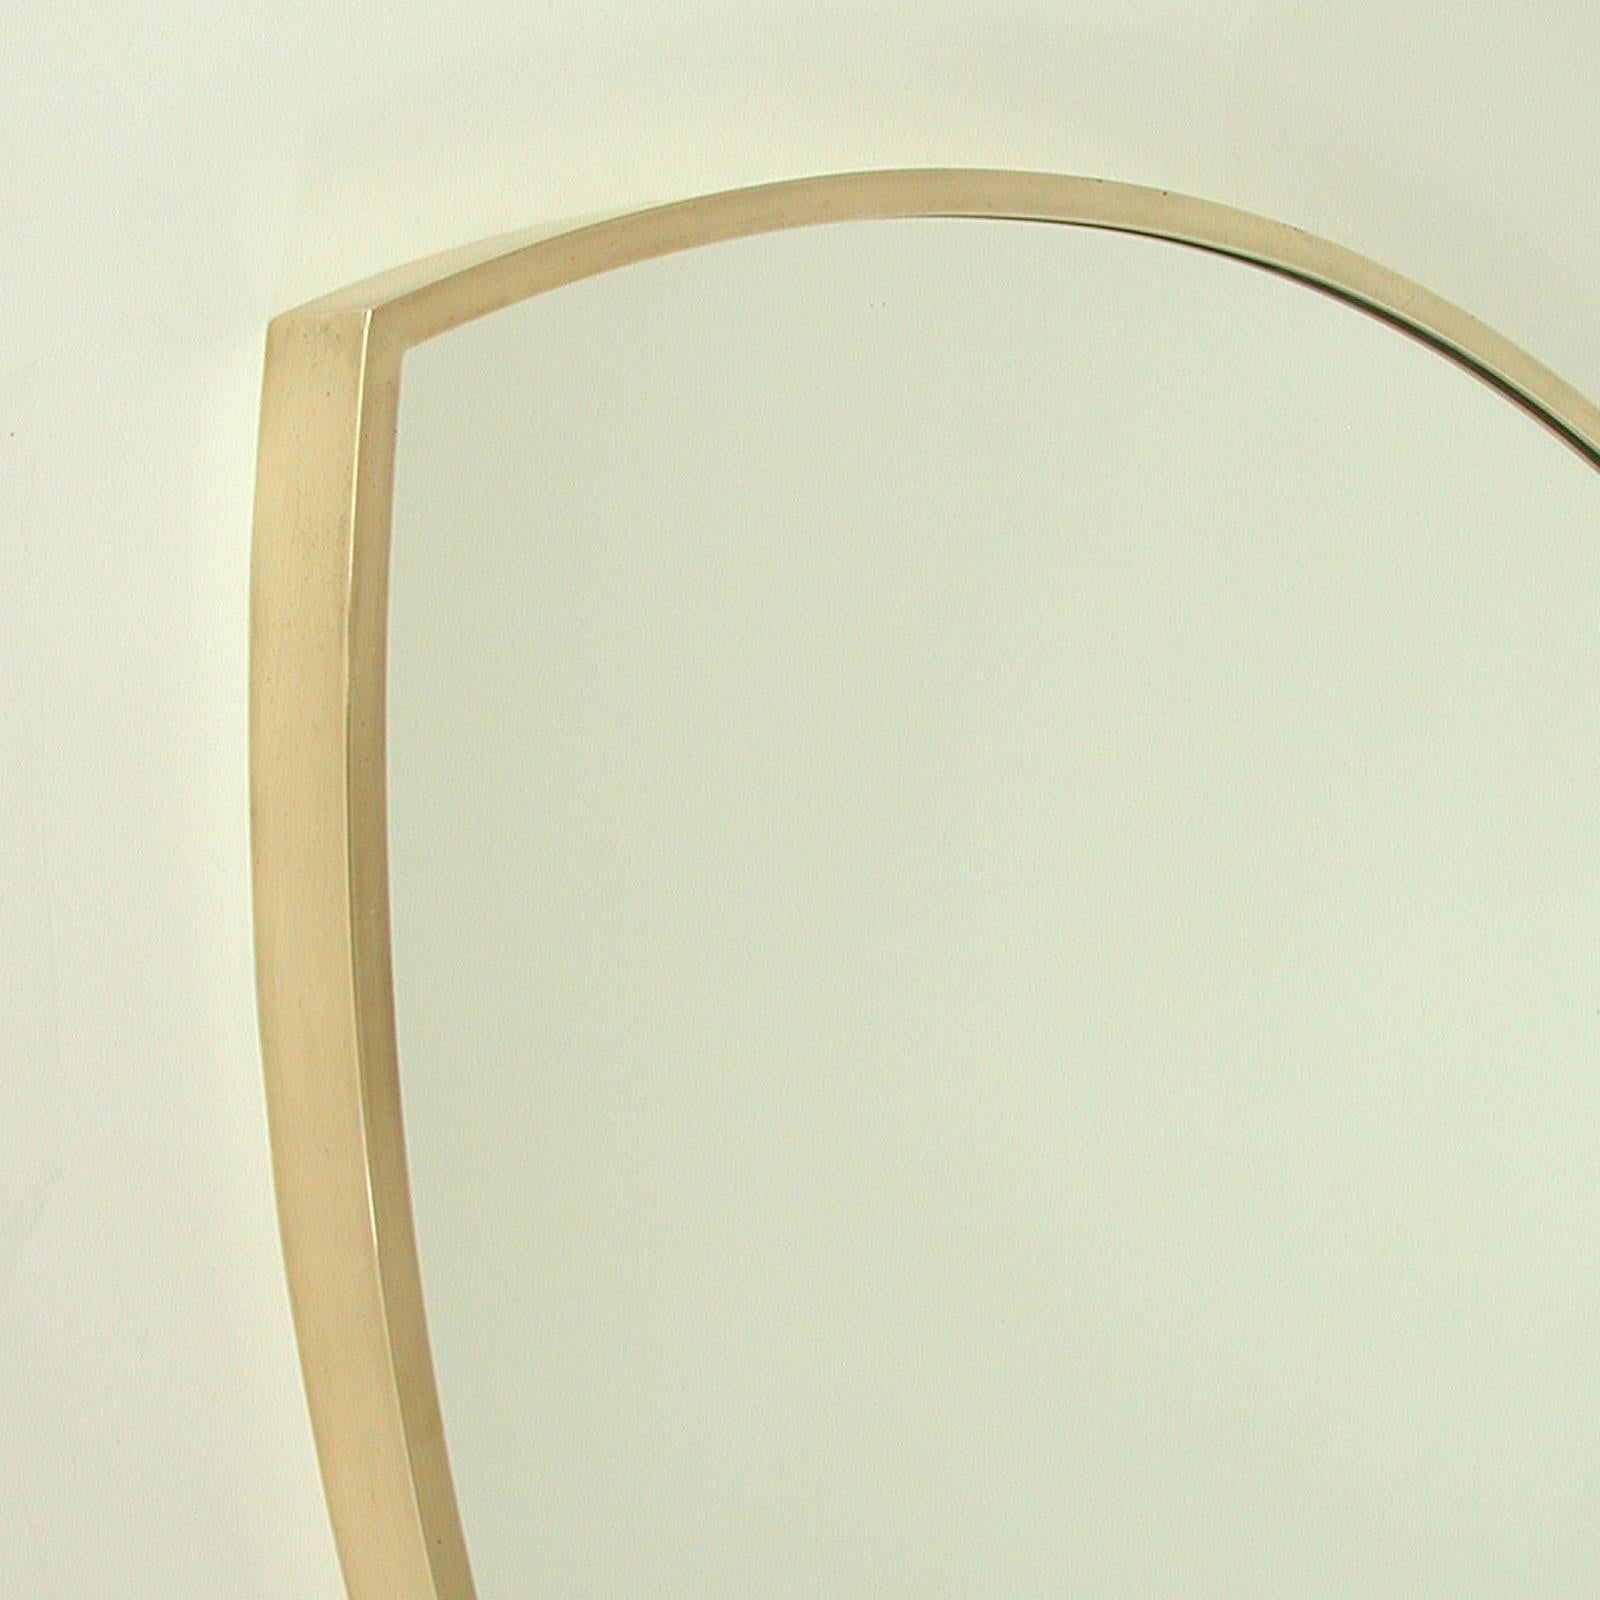 Italian Midcentury Brass Shield Shaped Wall Mirror, Gio Ponti Style, Italy 1950s For Sale